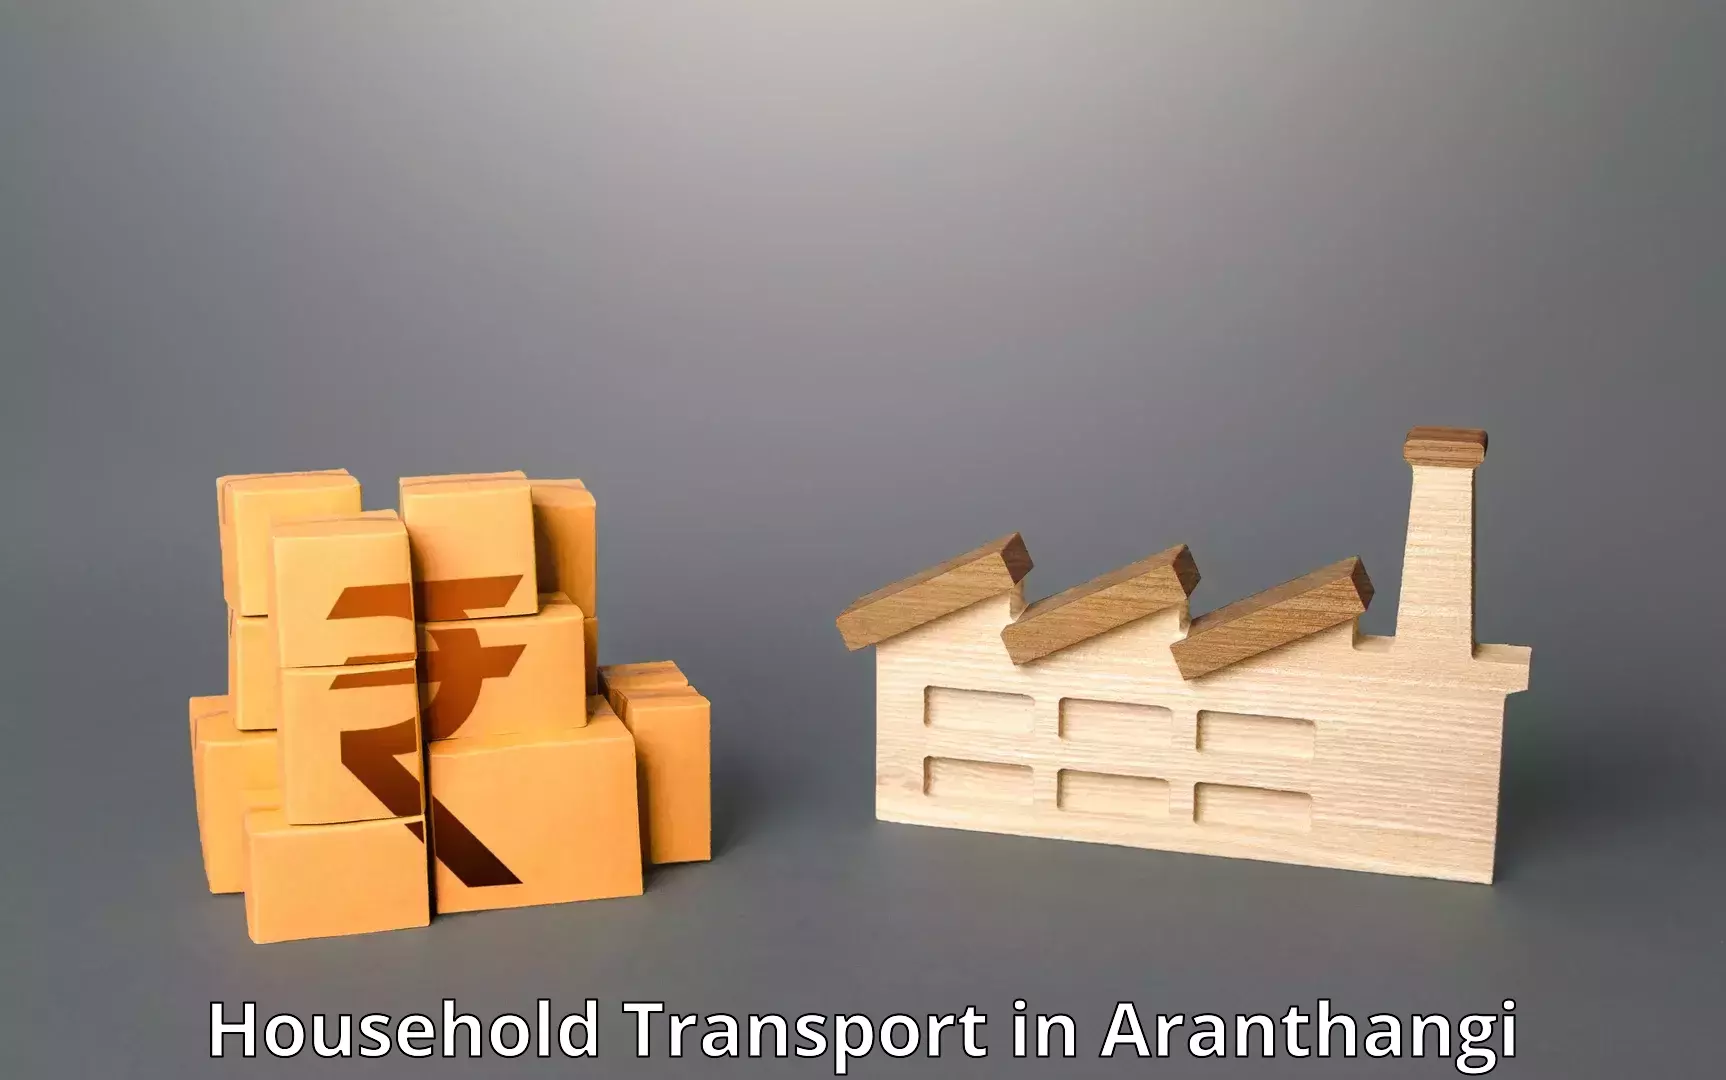 Furniture transport specialists in Aranthangi